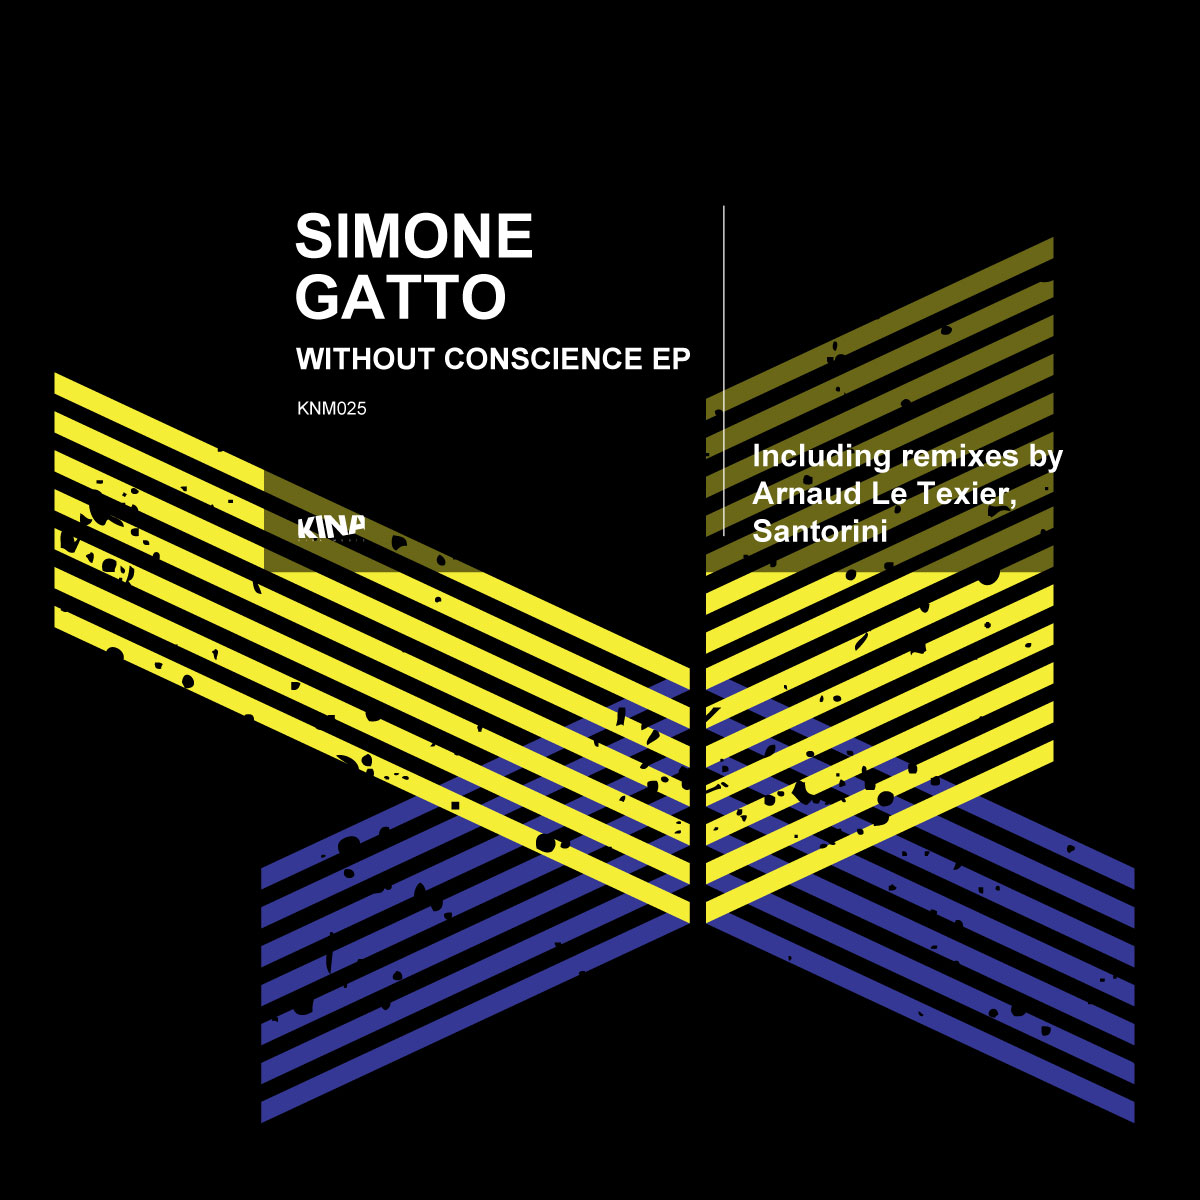 image cover: Simone Gatto - Without Conscience (Arnaud Le Texier's Remixes) [KNM025]